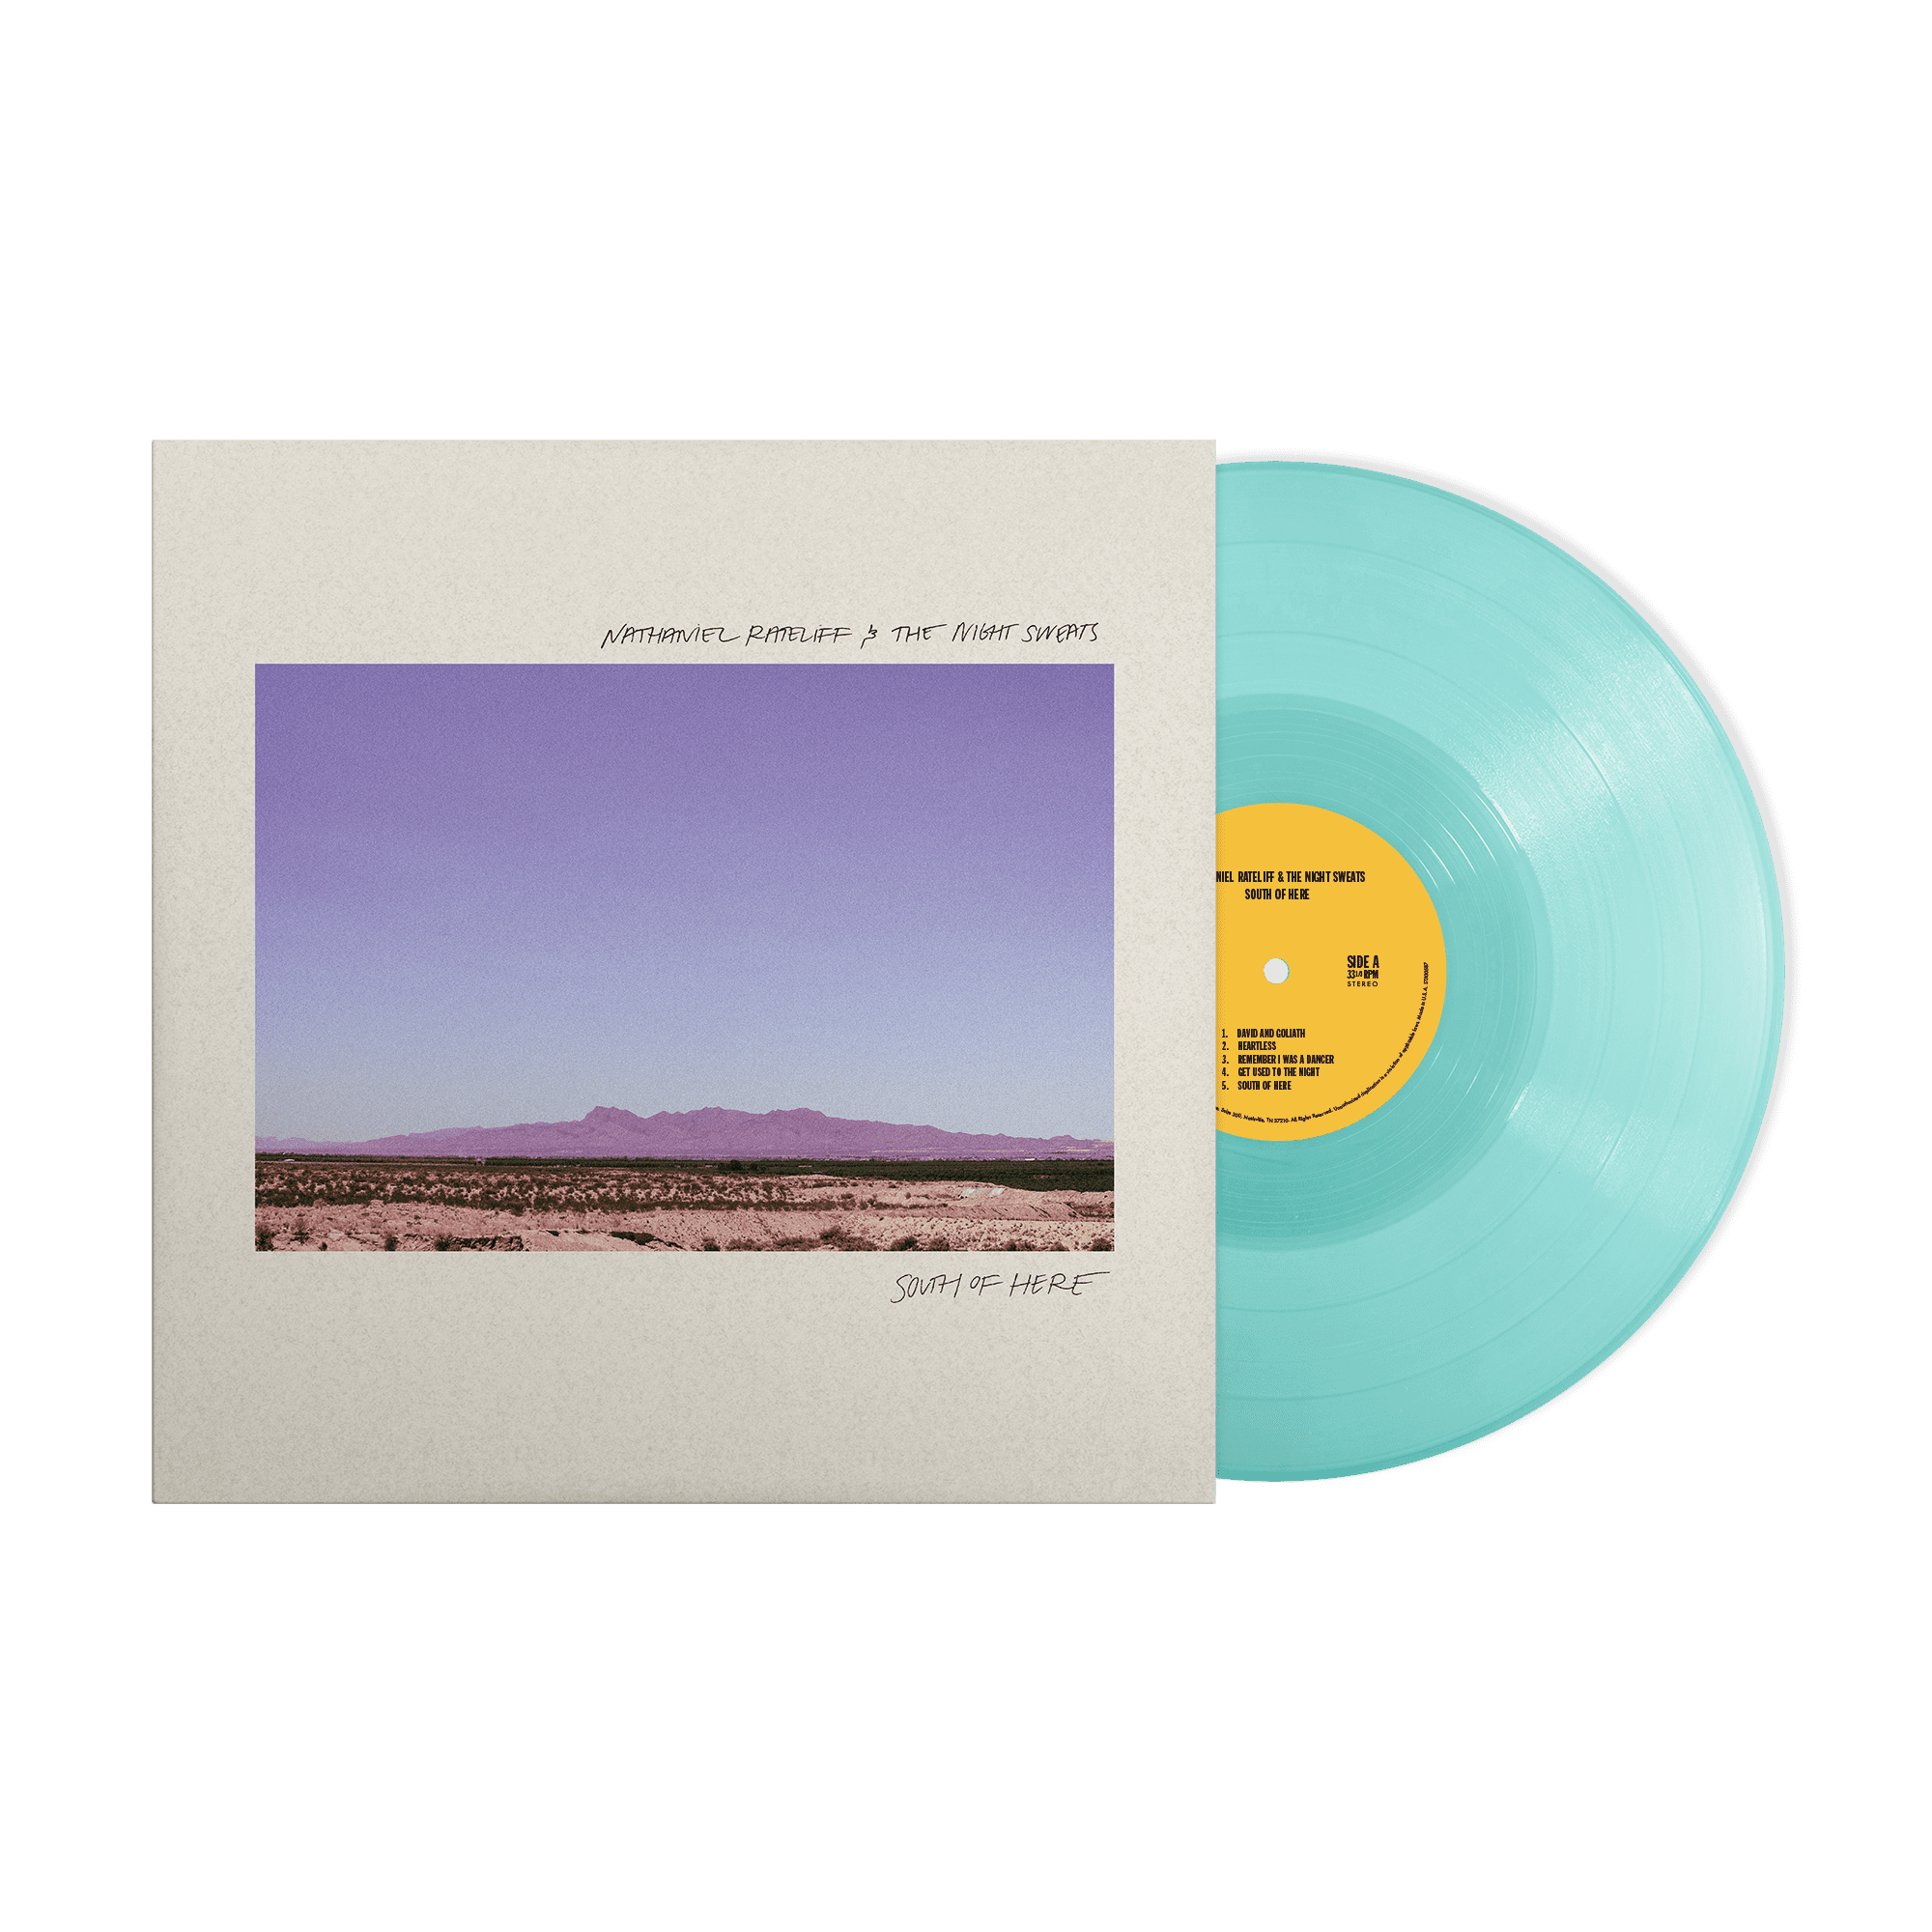 South of Here: Colour Vinyl LP & Exclusive Signed Print